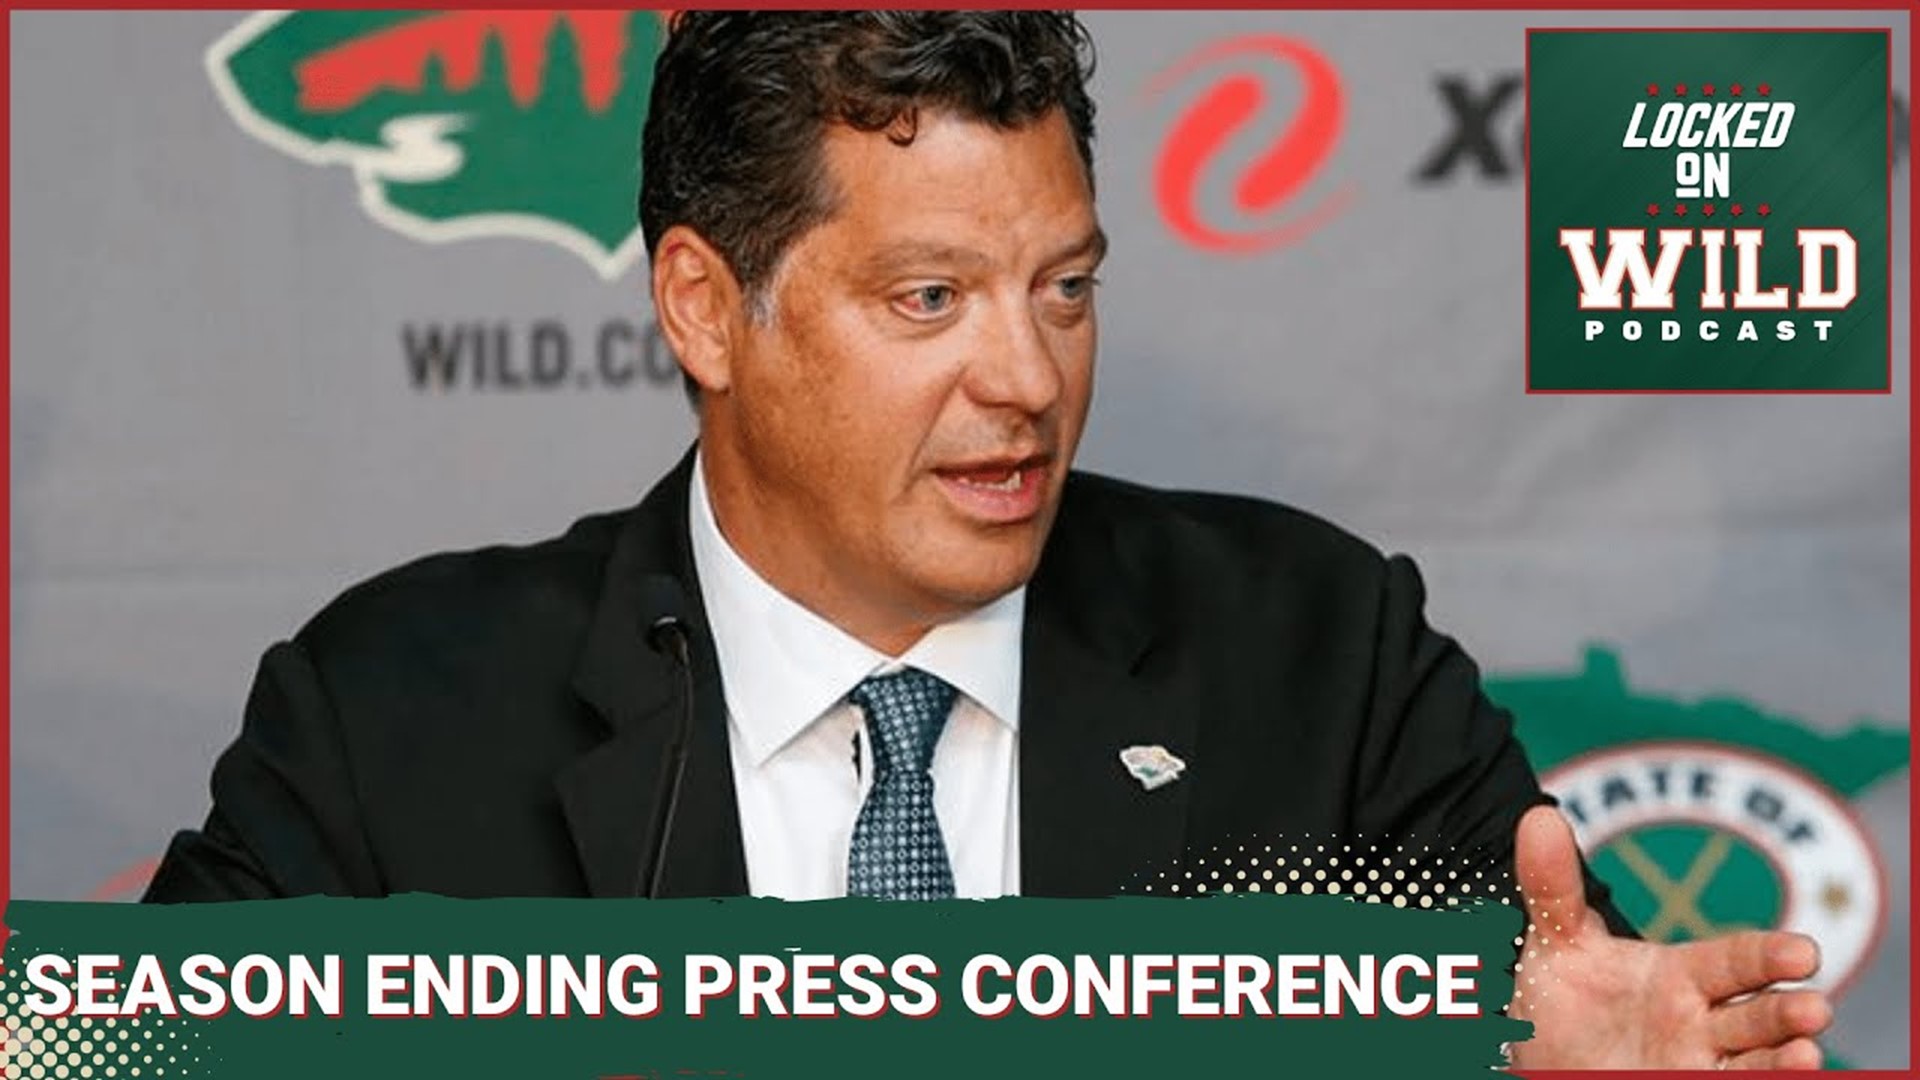 Bill Guerin and John Hynes need to turn Words into Action after Season Ending Press Conference